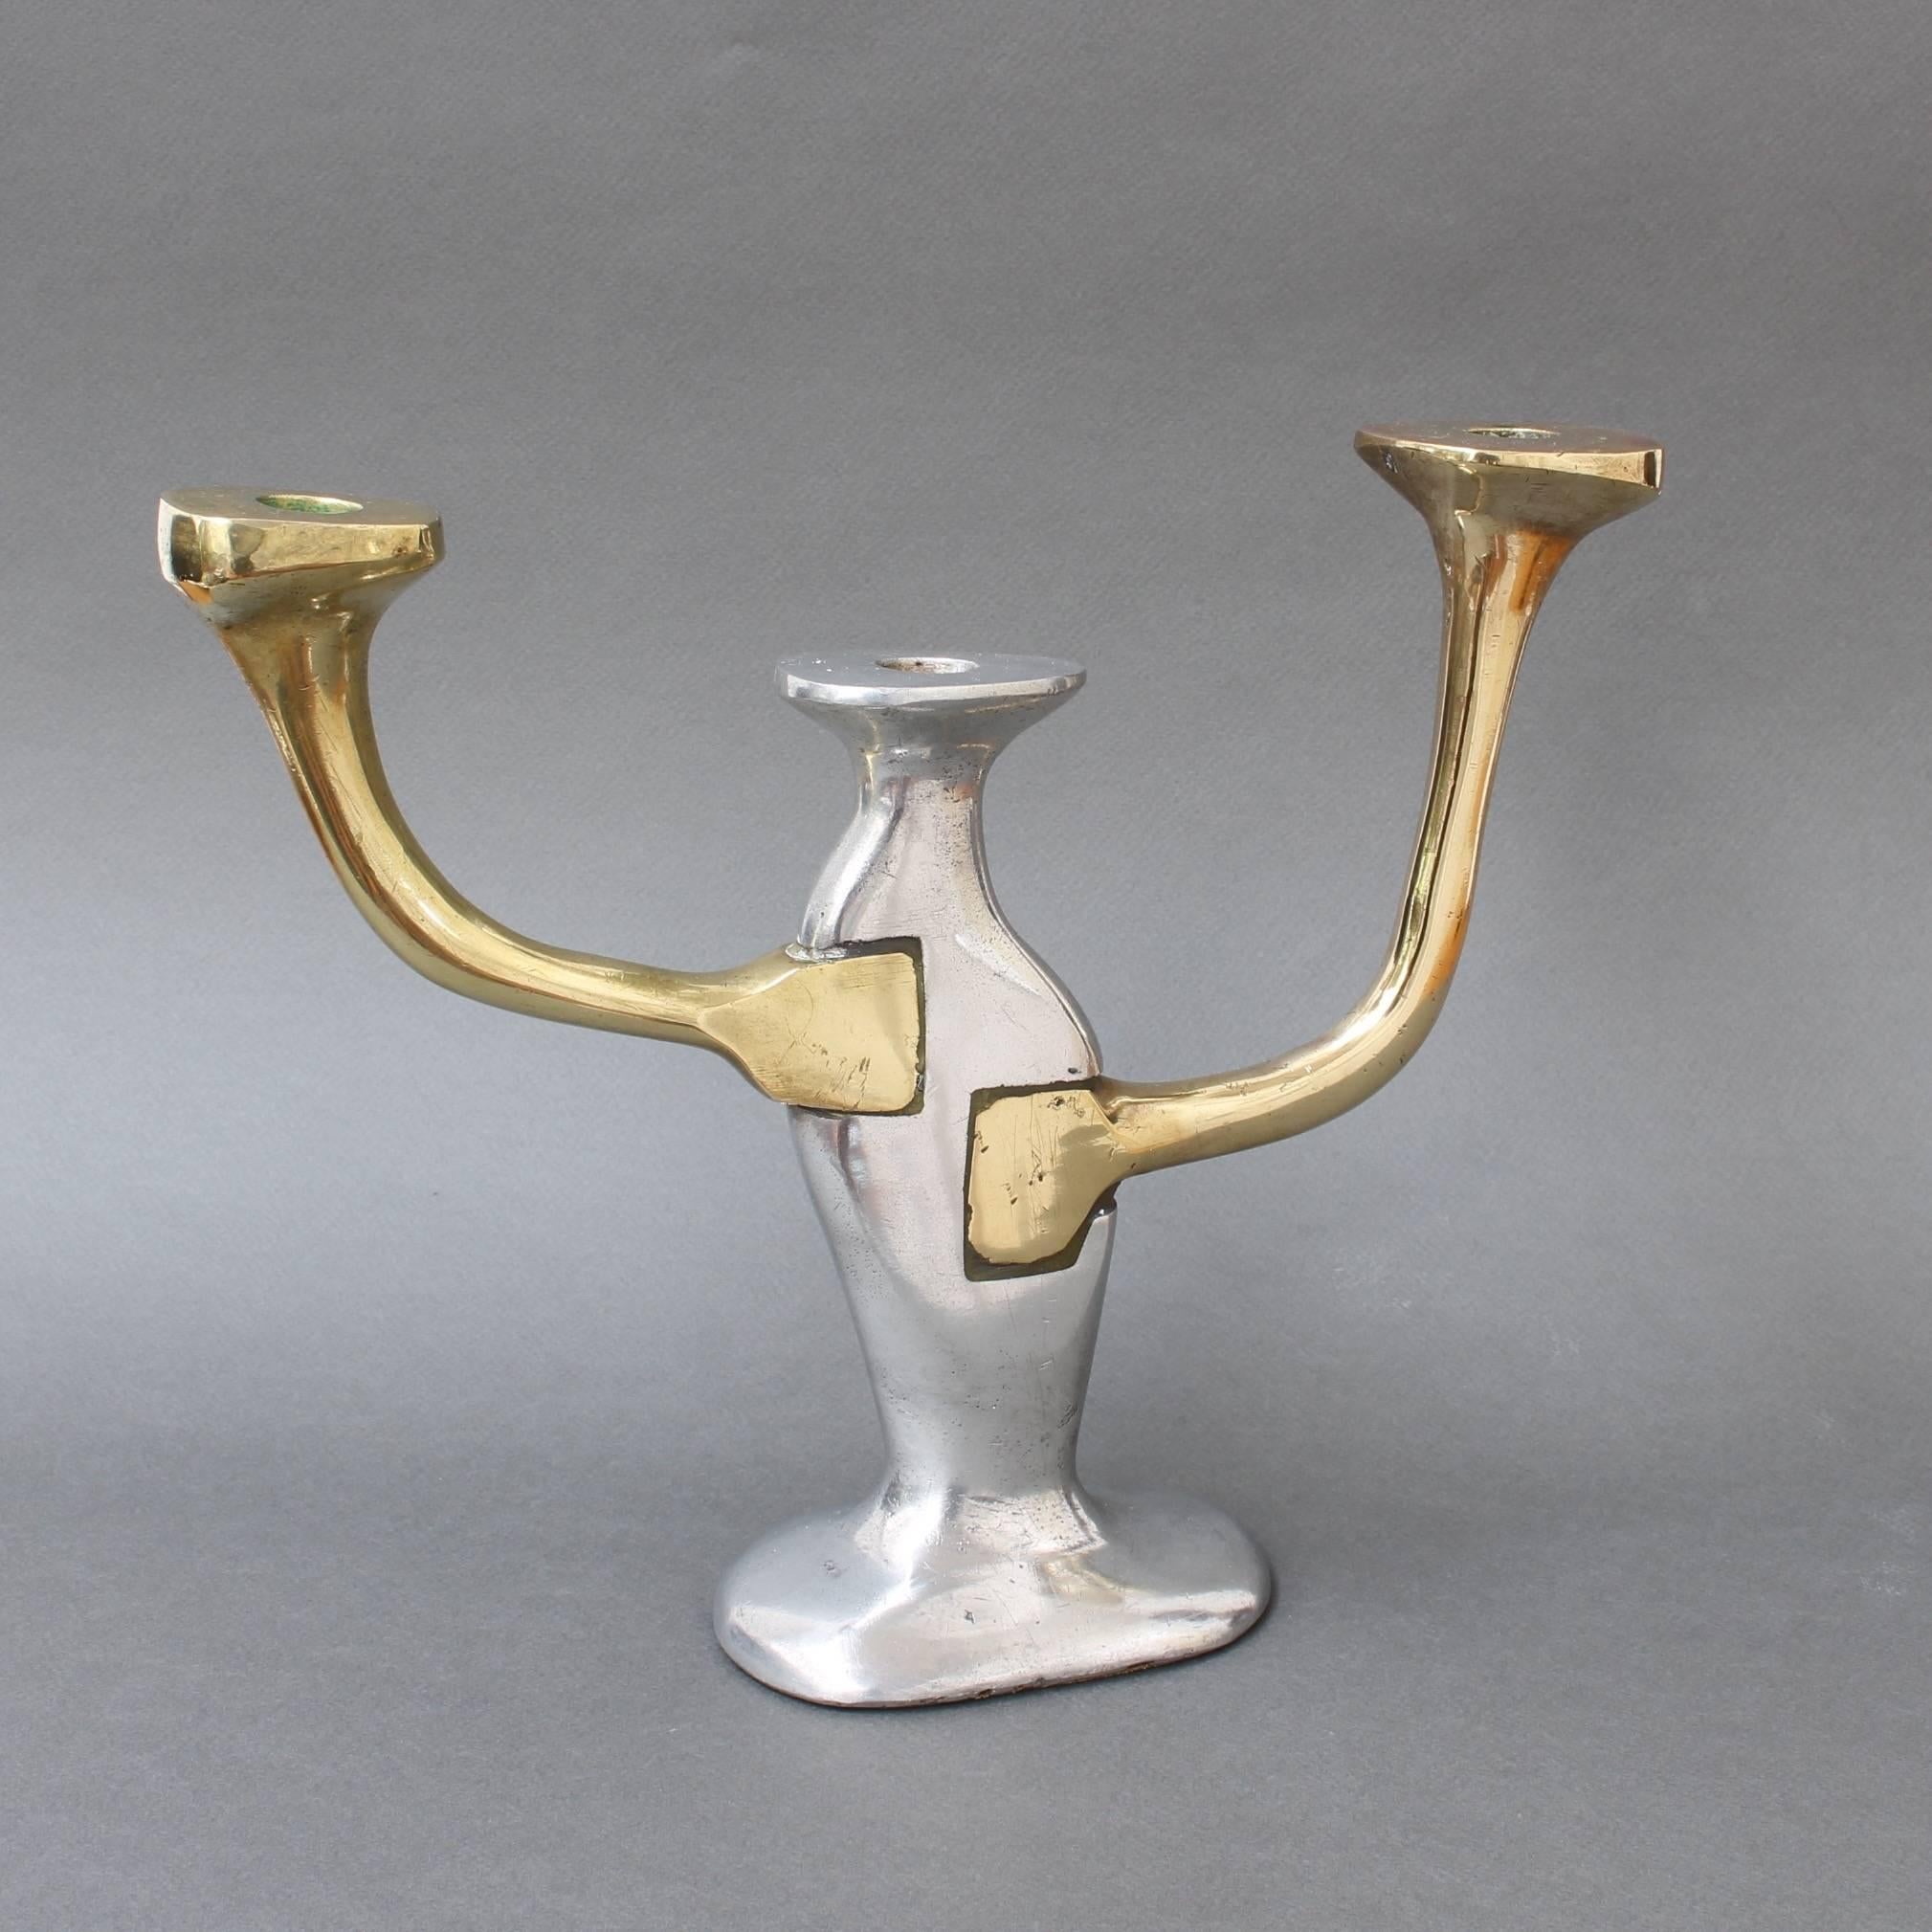 Aluminium and brass candleholder by David Marshall, circa 1970s. This candleholder appears to be inspired by Gaudi in that it seems imperfect or irregular. Therein lies its beauty. Like branches emanating from a tree the candle stems grow according